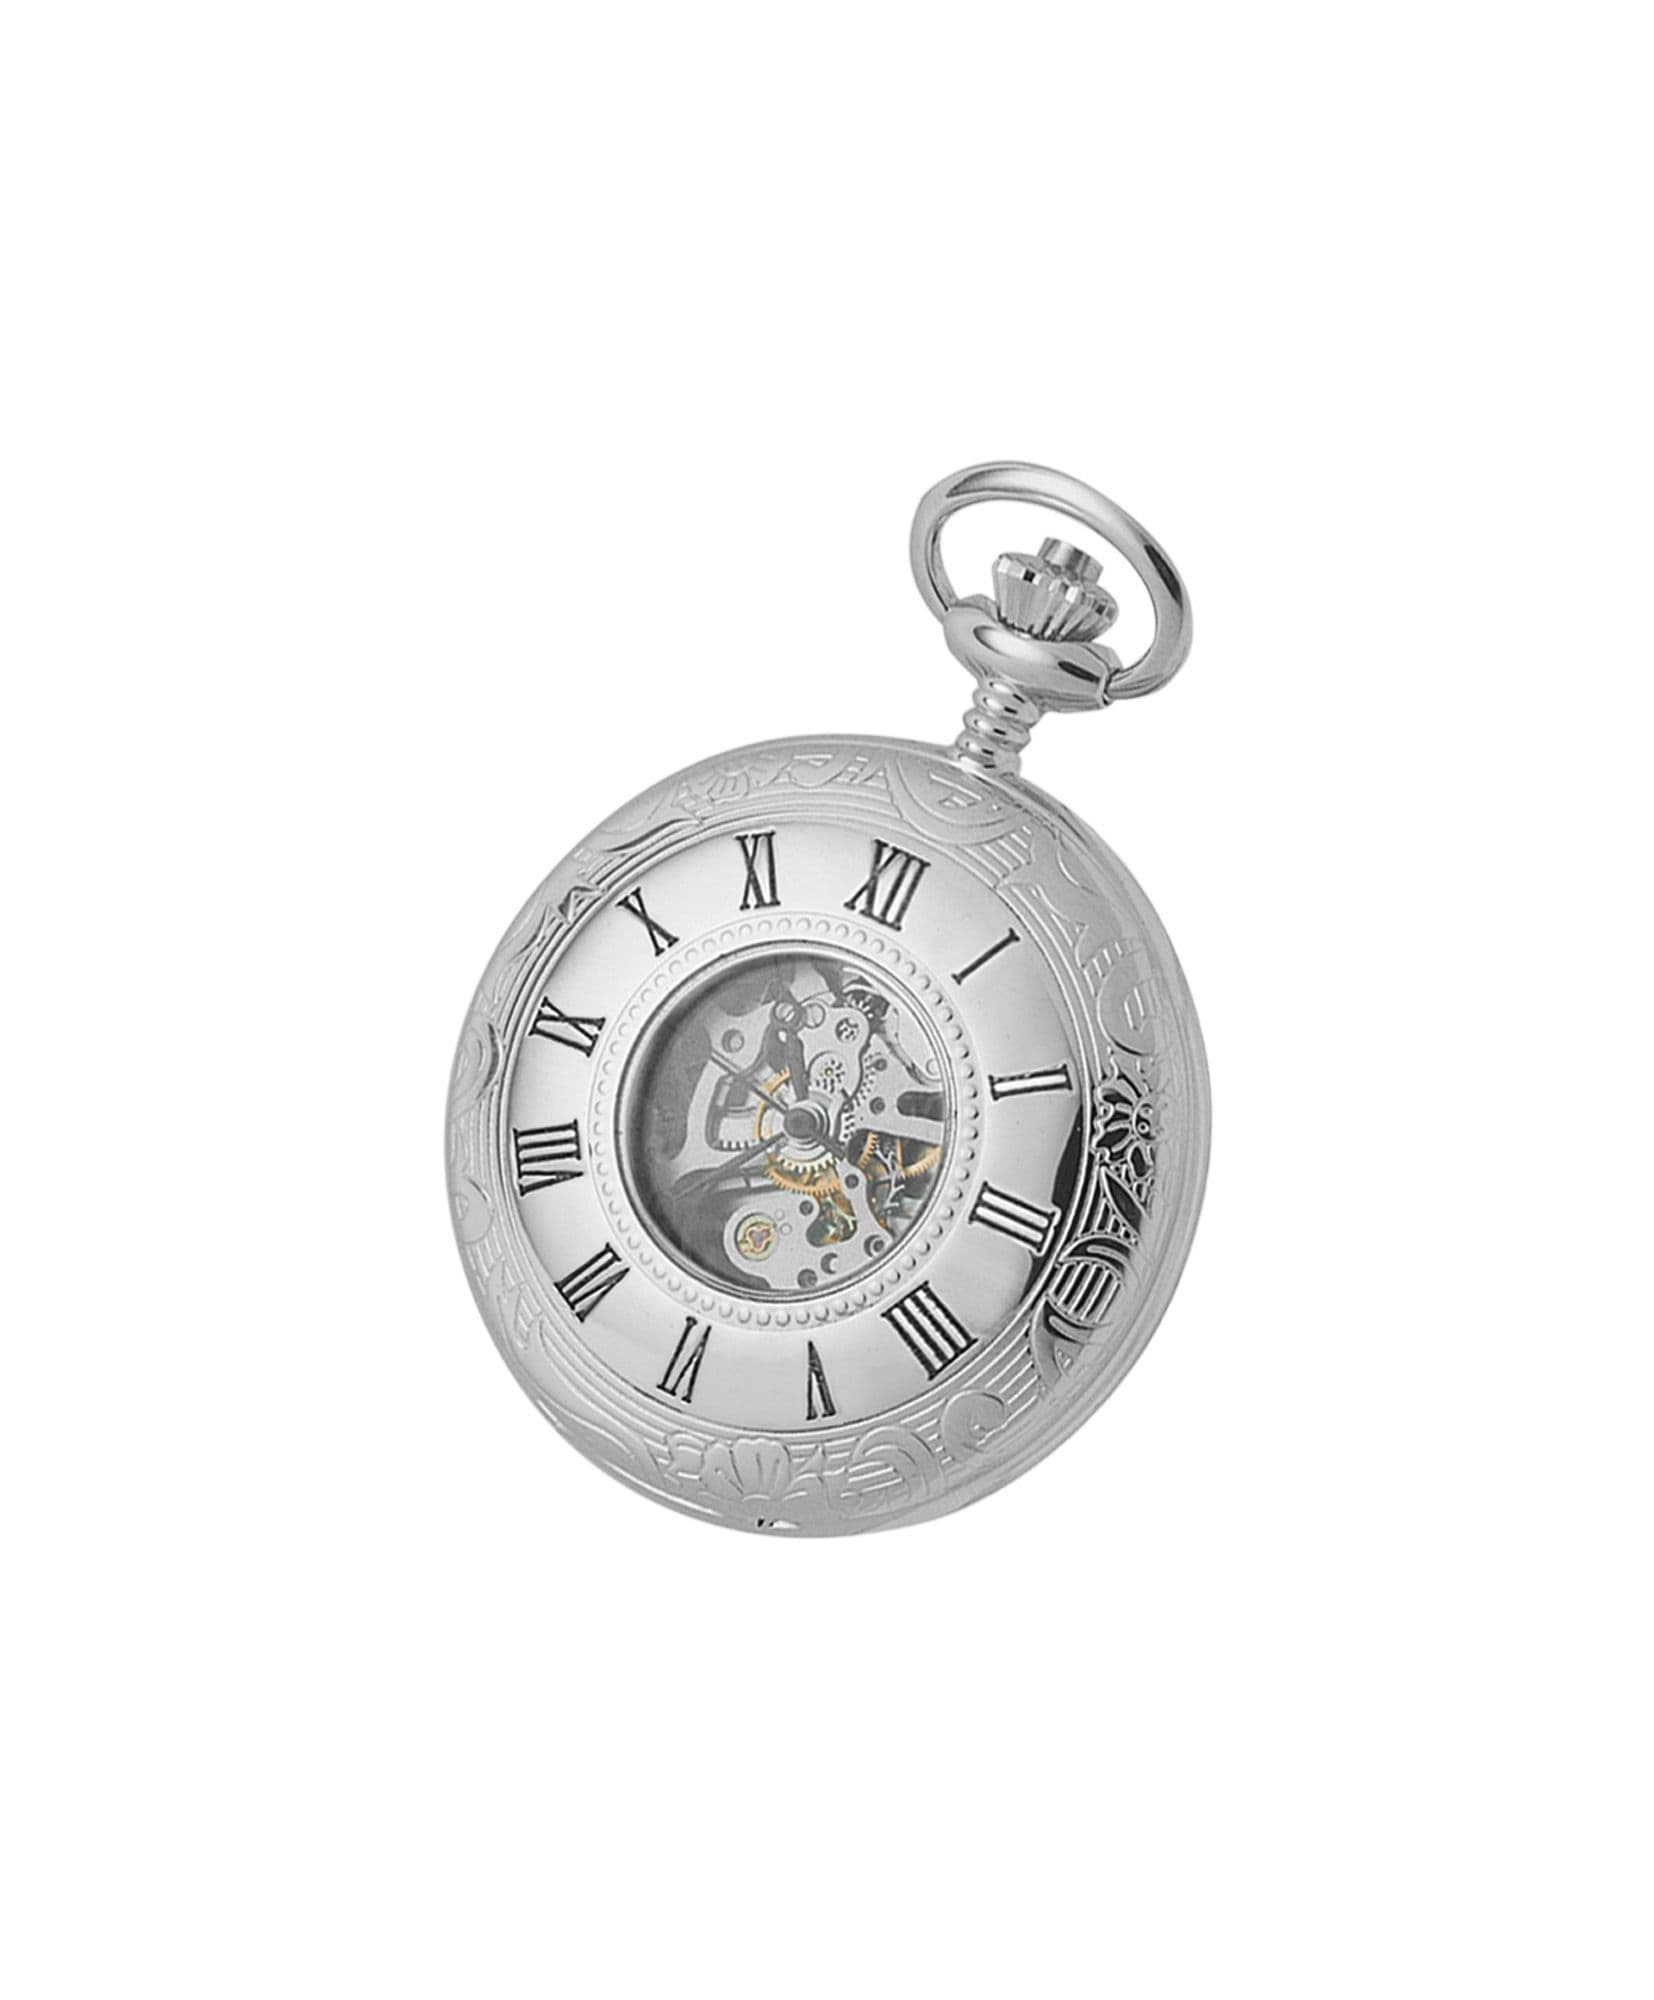 Mechanical Chrome Plated Half Hunter Patterned Pocket Watch With Chain